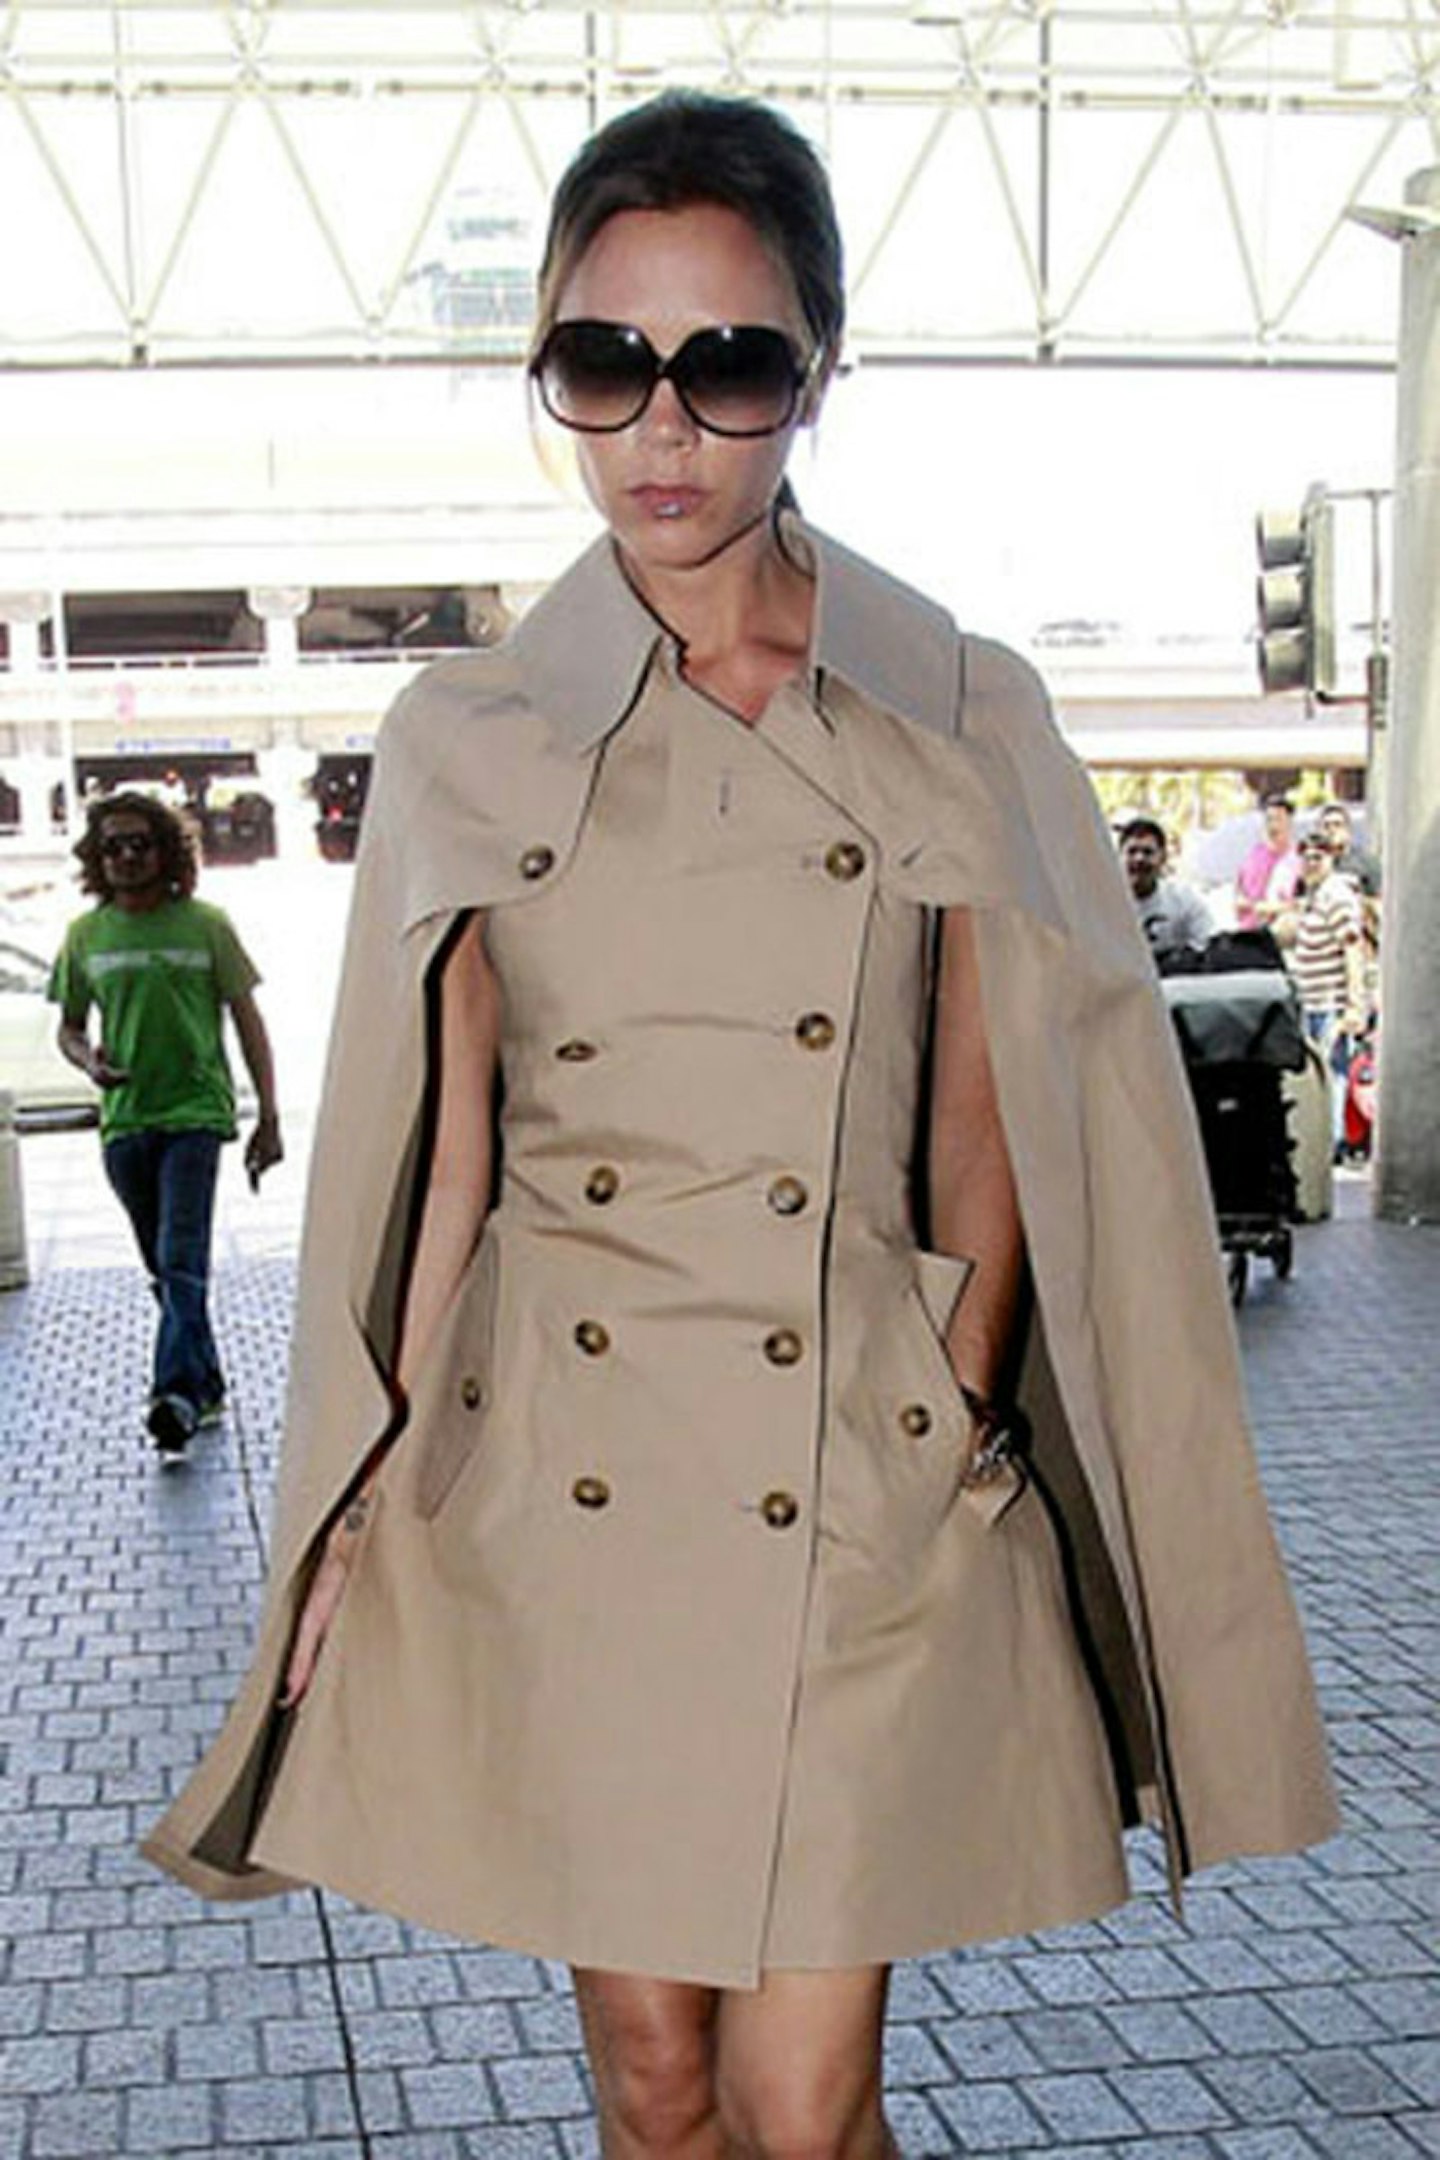 9. The Trench Coat